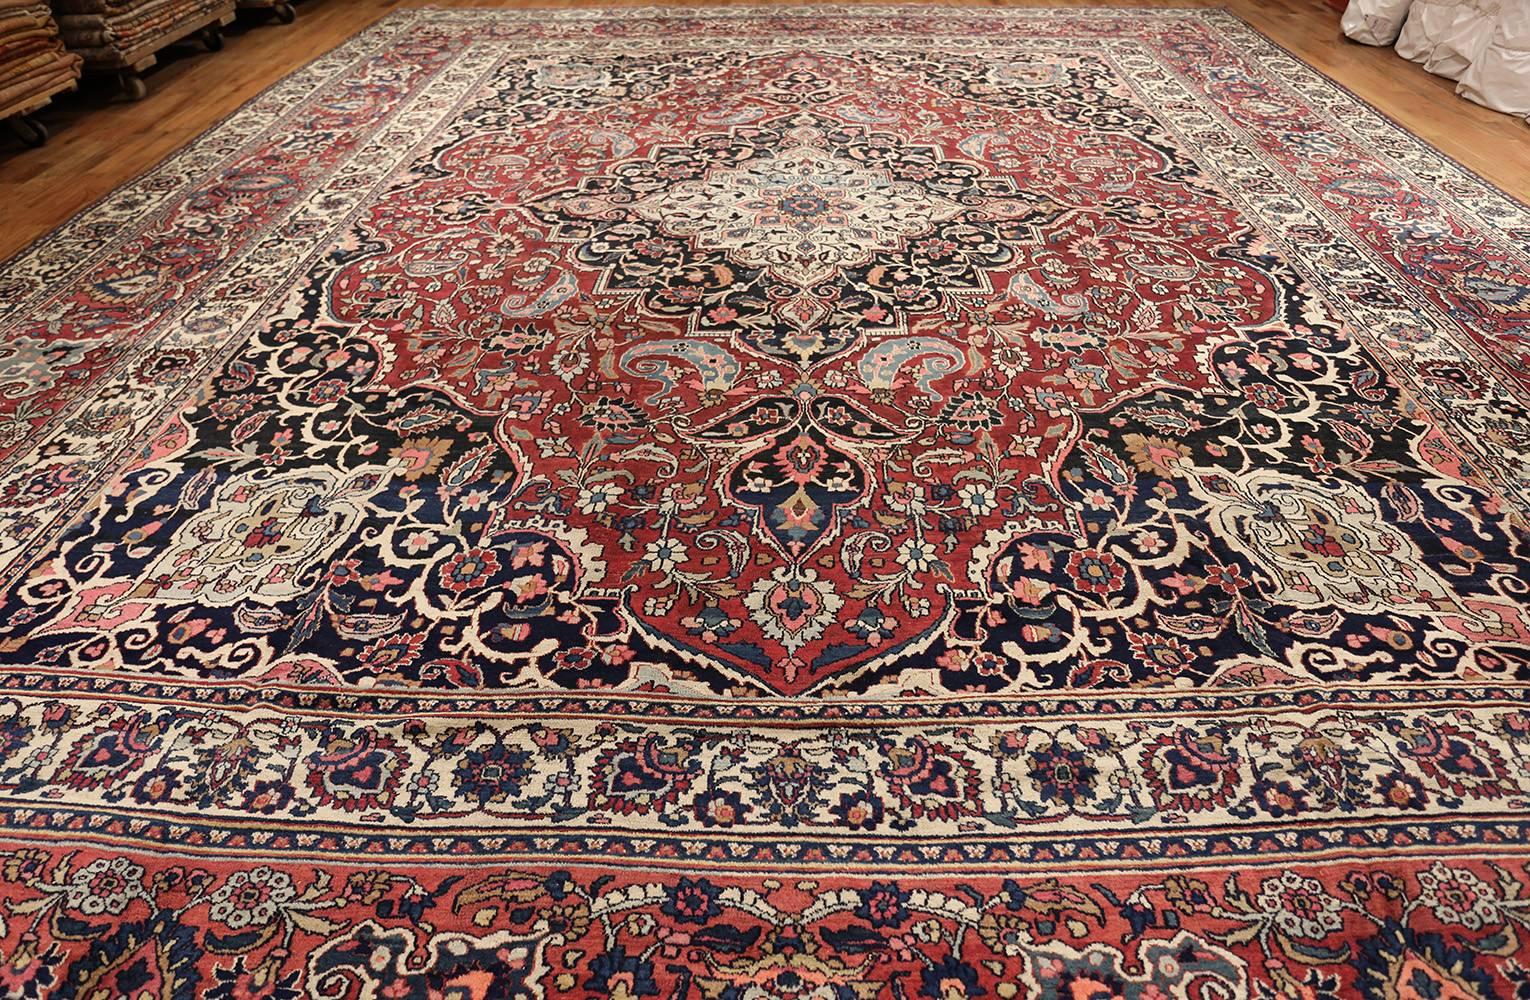 Wool Oversized Fine Antique Persian Khorassan Mashad Rug. Size: 15 ft 6 in x 20 ft 